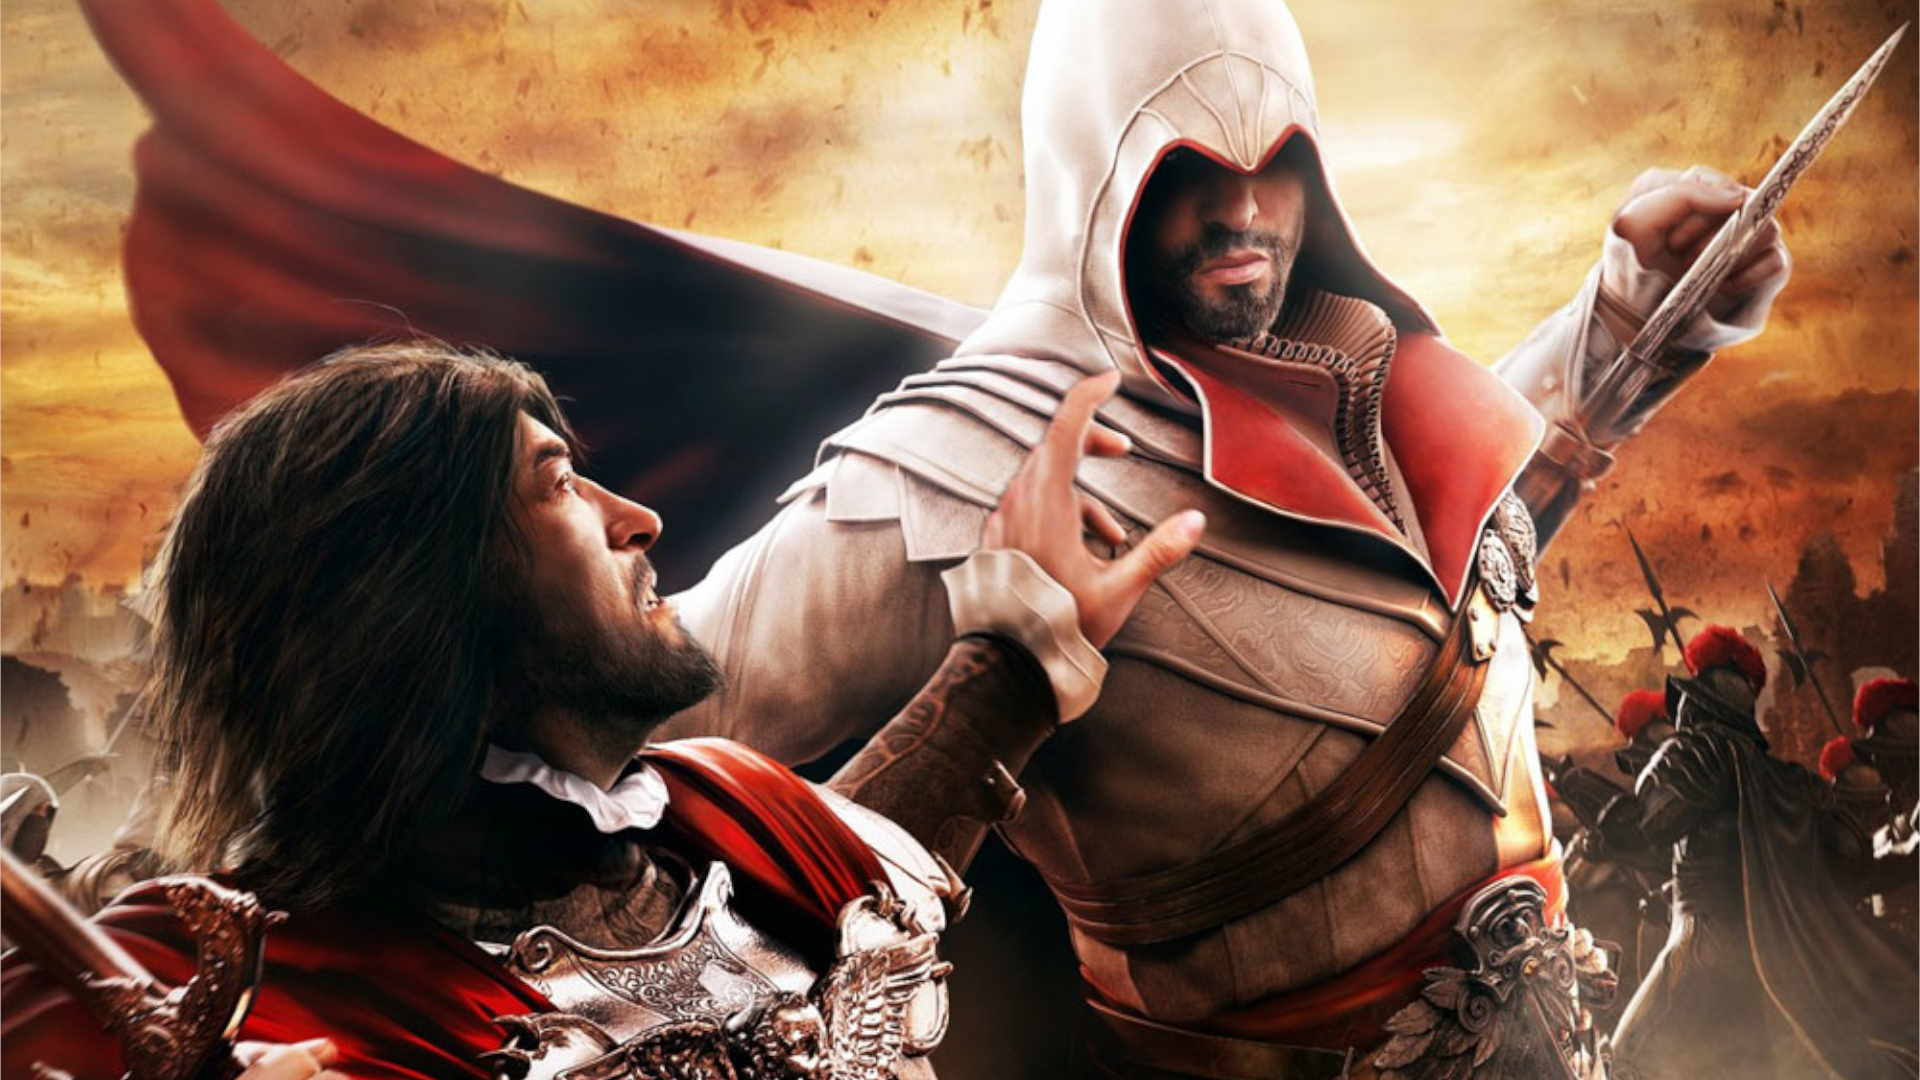 Assassin's Creed 3 Review: Rotten Apples